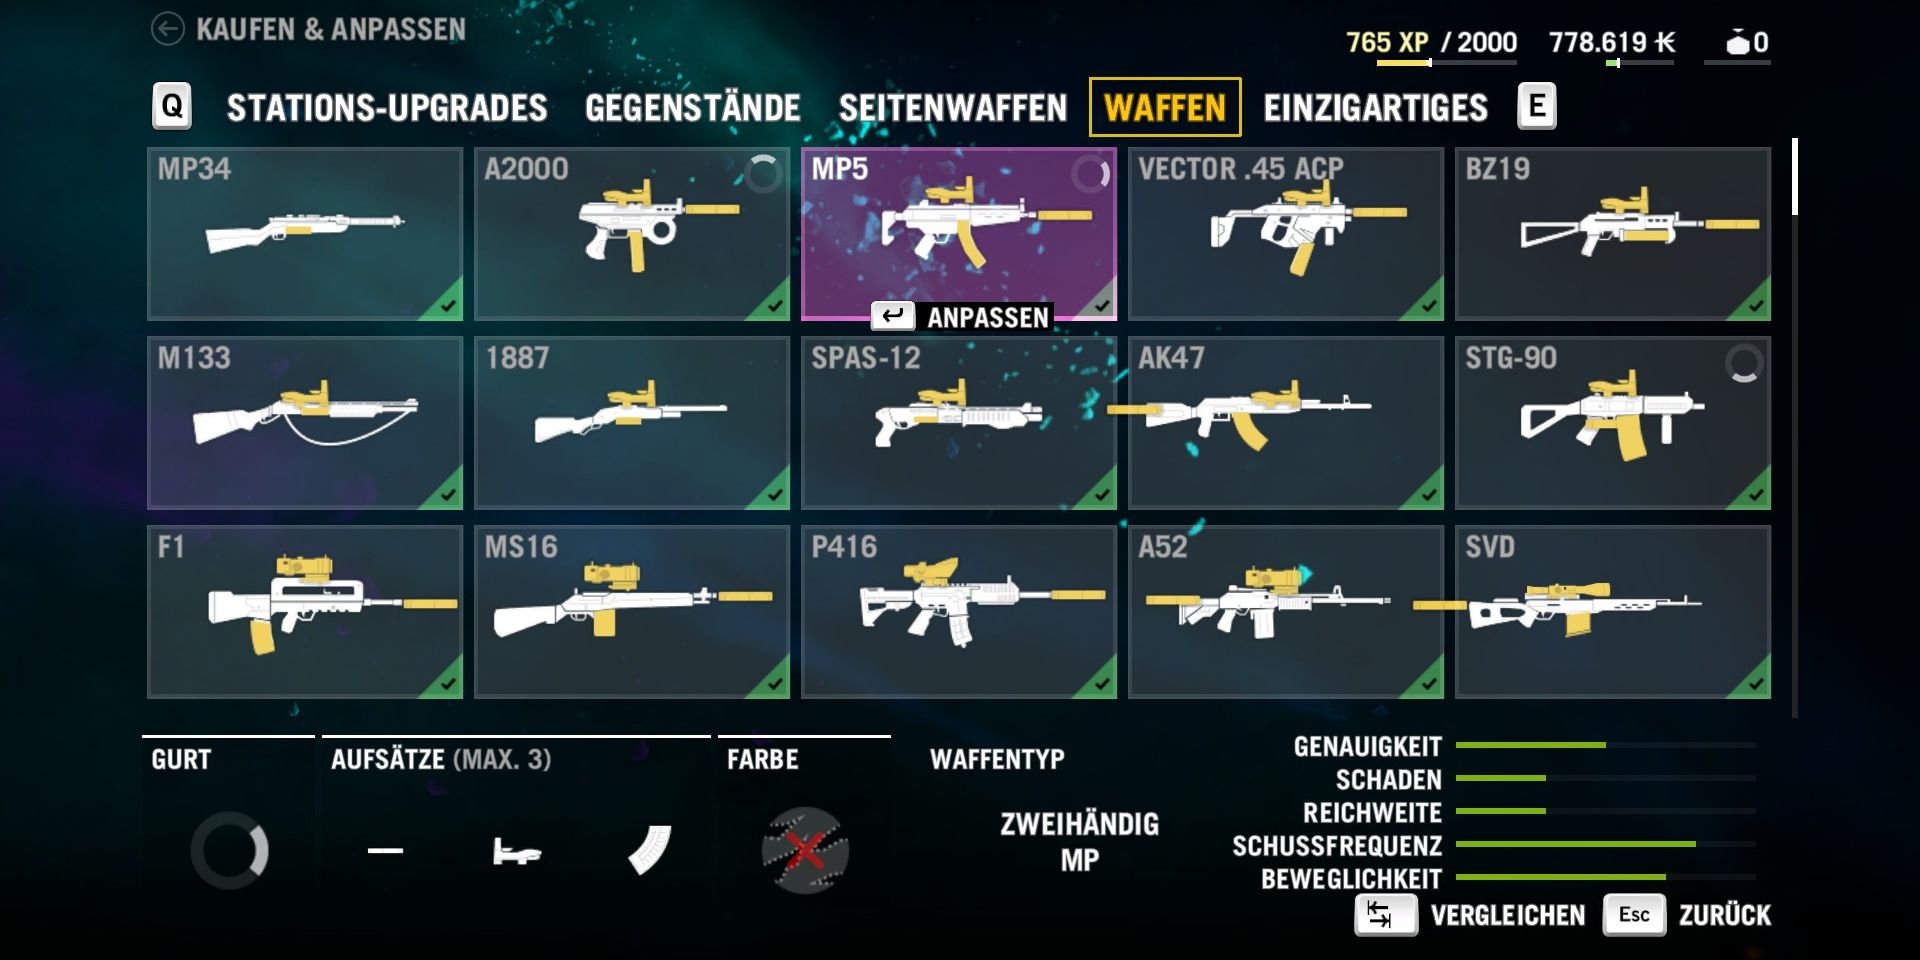 menu showing all of the player's guns and their attachments.